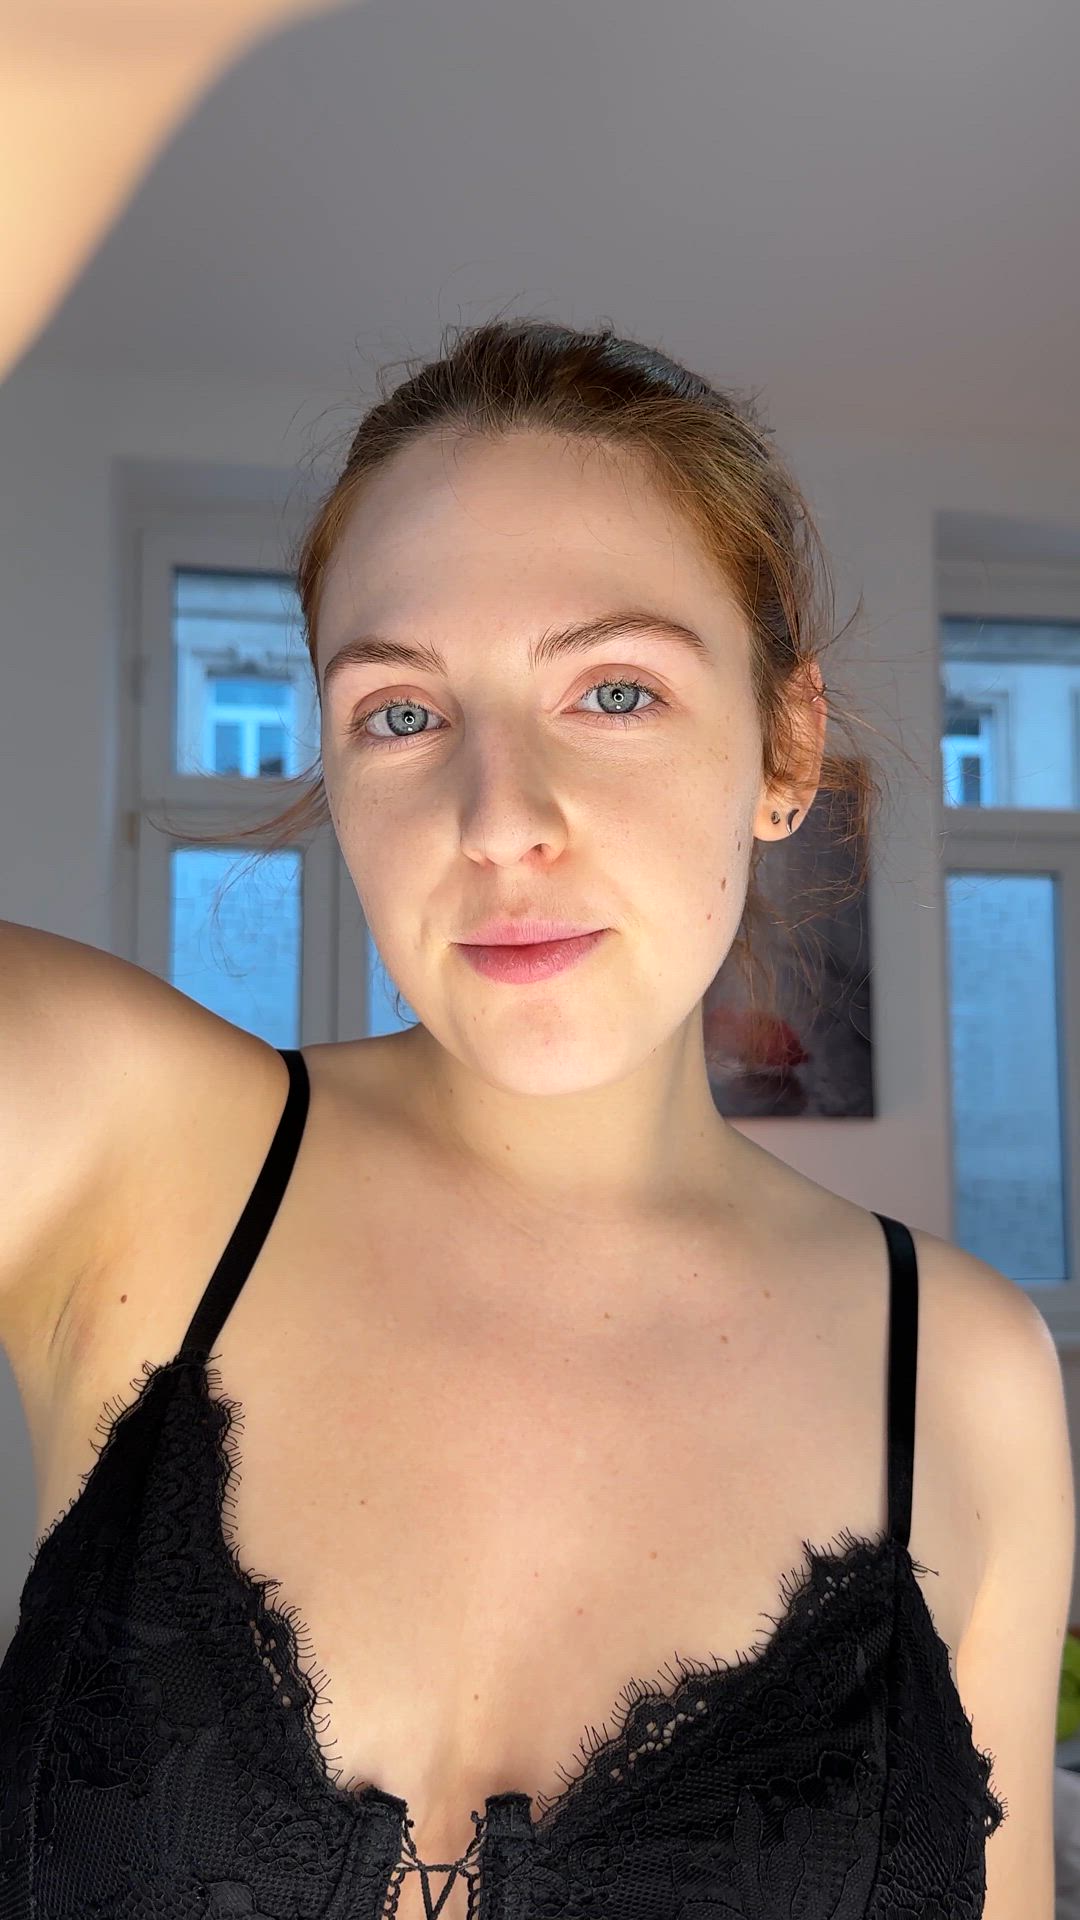 Pussy porn video with onlyfans model Ginger Rose <strong>@gingerxrose</strong>